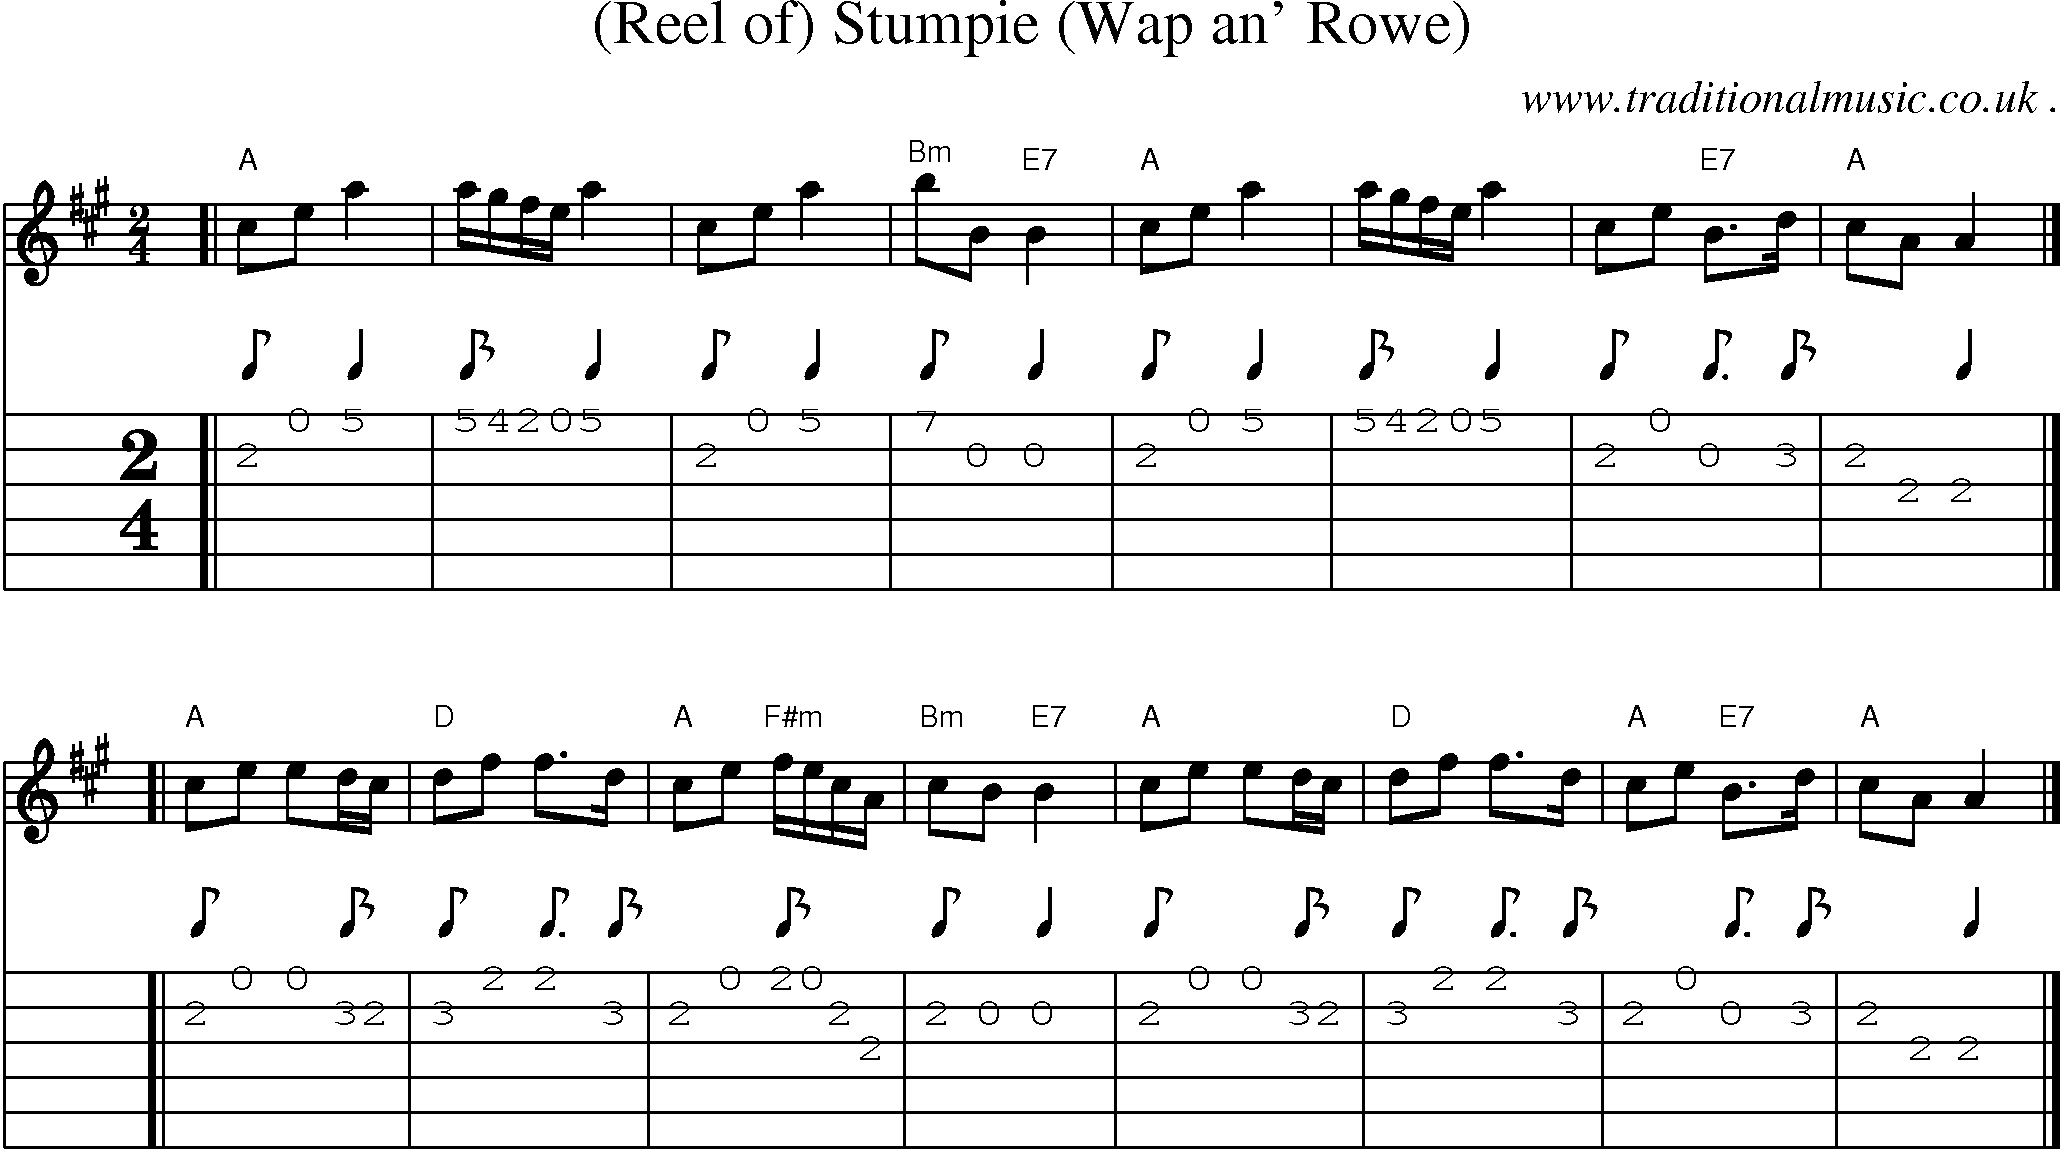 Sheet-music  score, Chords and Guitar Tabs for Reel Of Stumpie Wap An Rowe